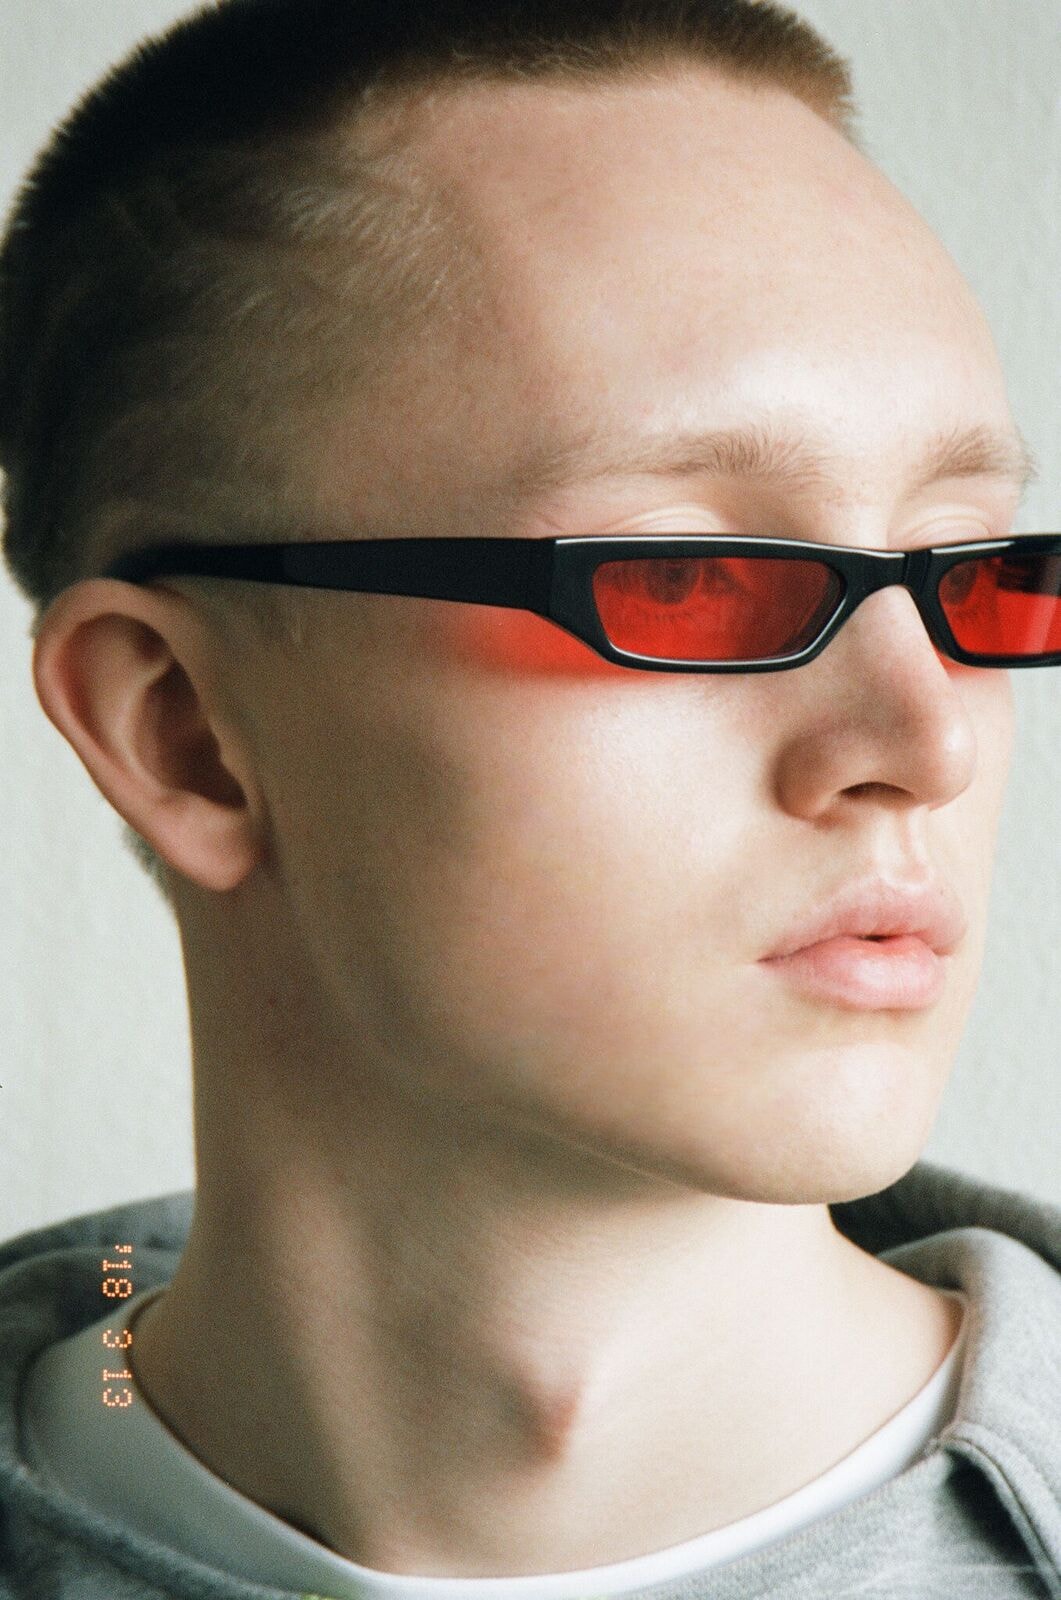 Ace & Tate Futuristic Sunglasses in Pris and Neo Yellow Black Red Sci-Fi Movie Characters